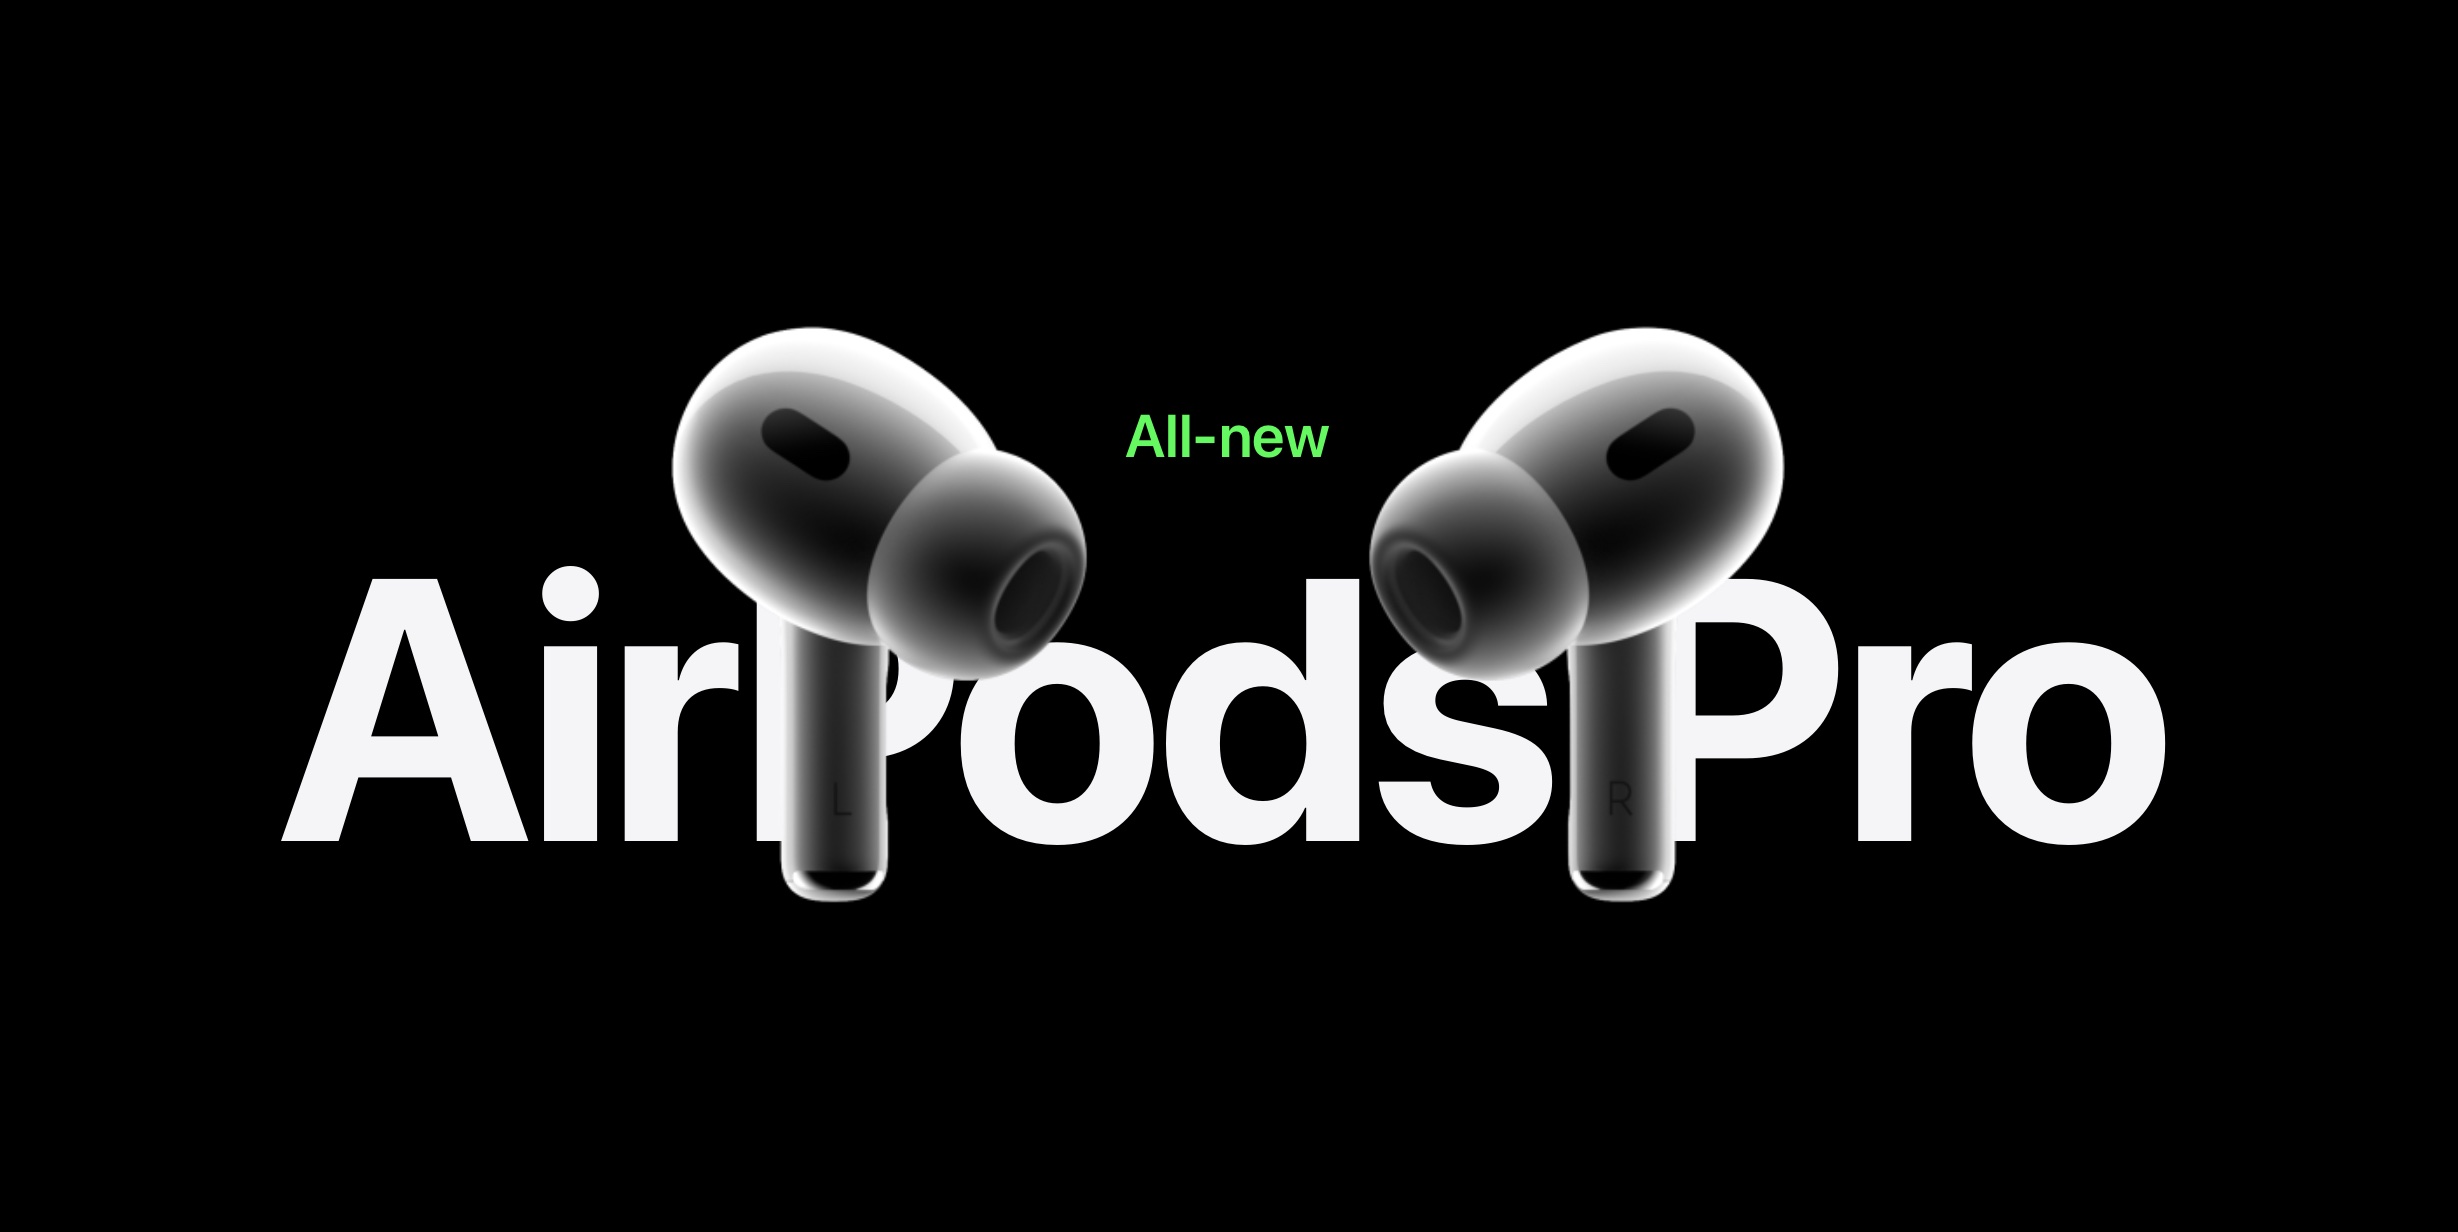 AirPods 2 could feature lossless support in future